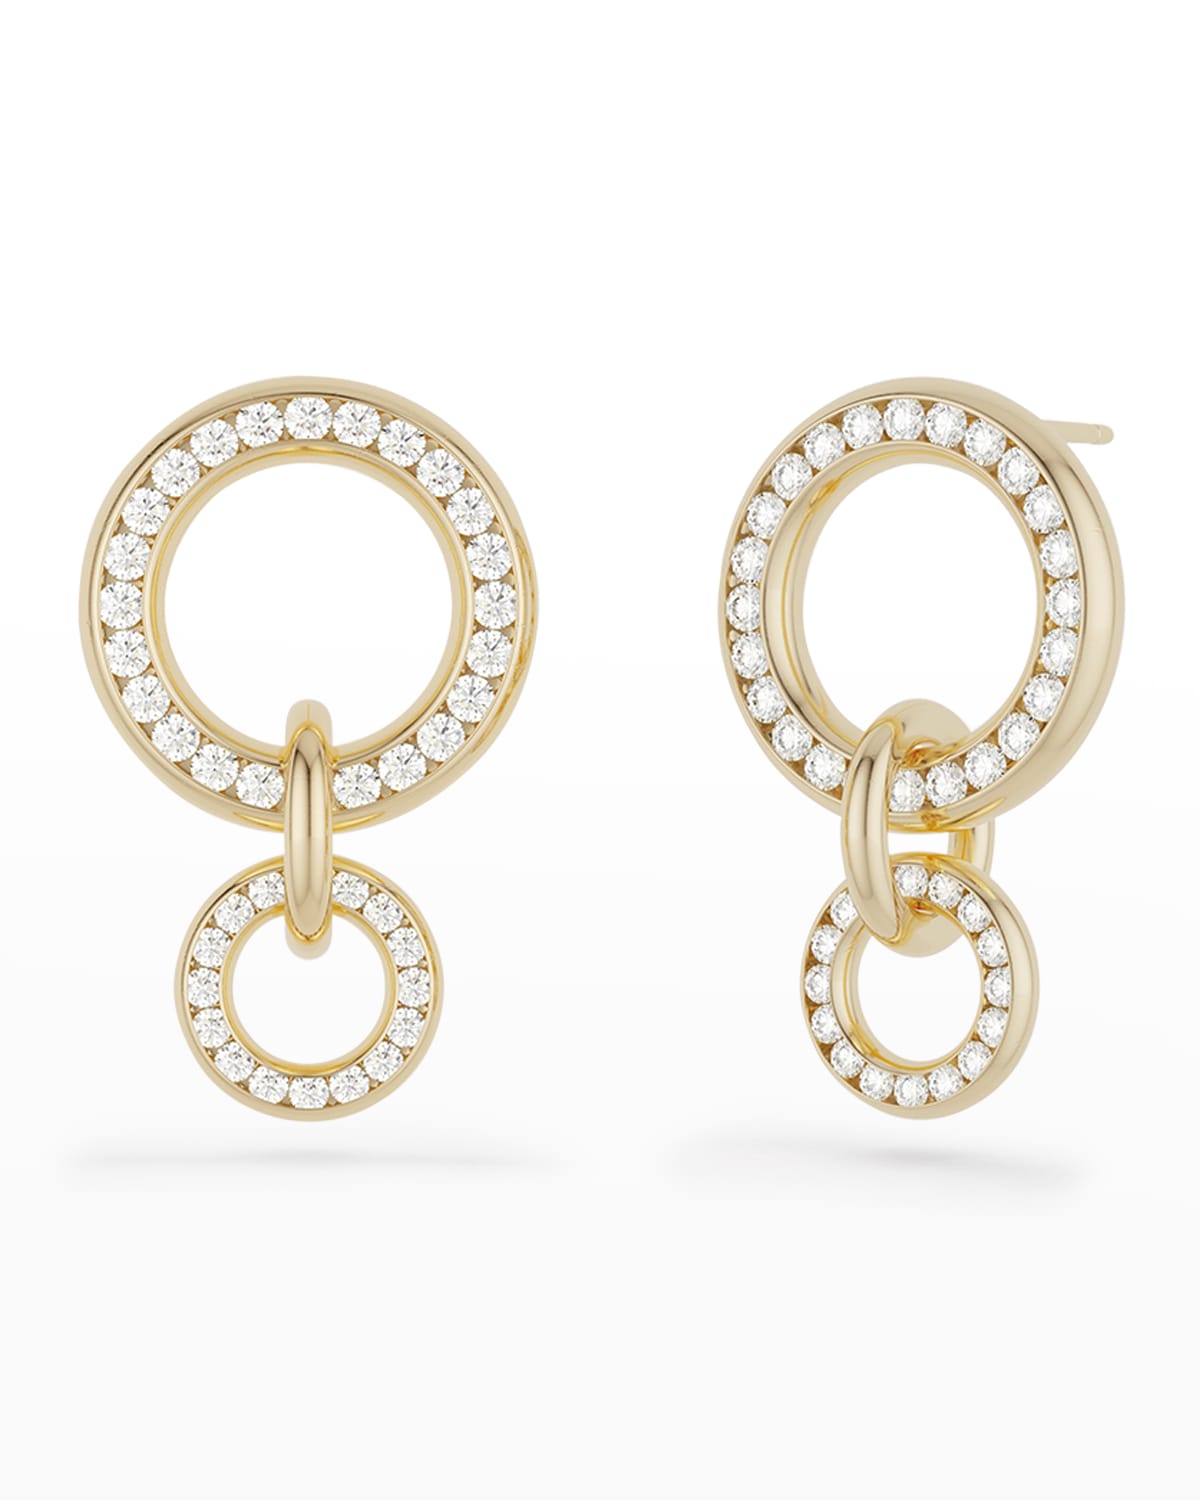 White Gold 3-Link Earrings with White Diamonds